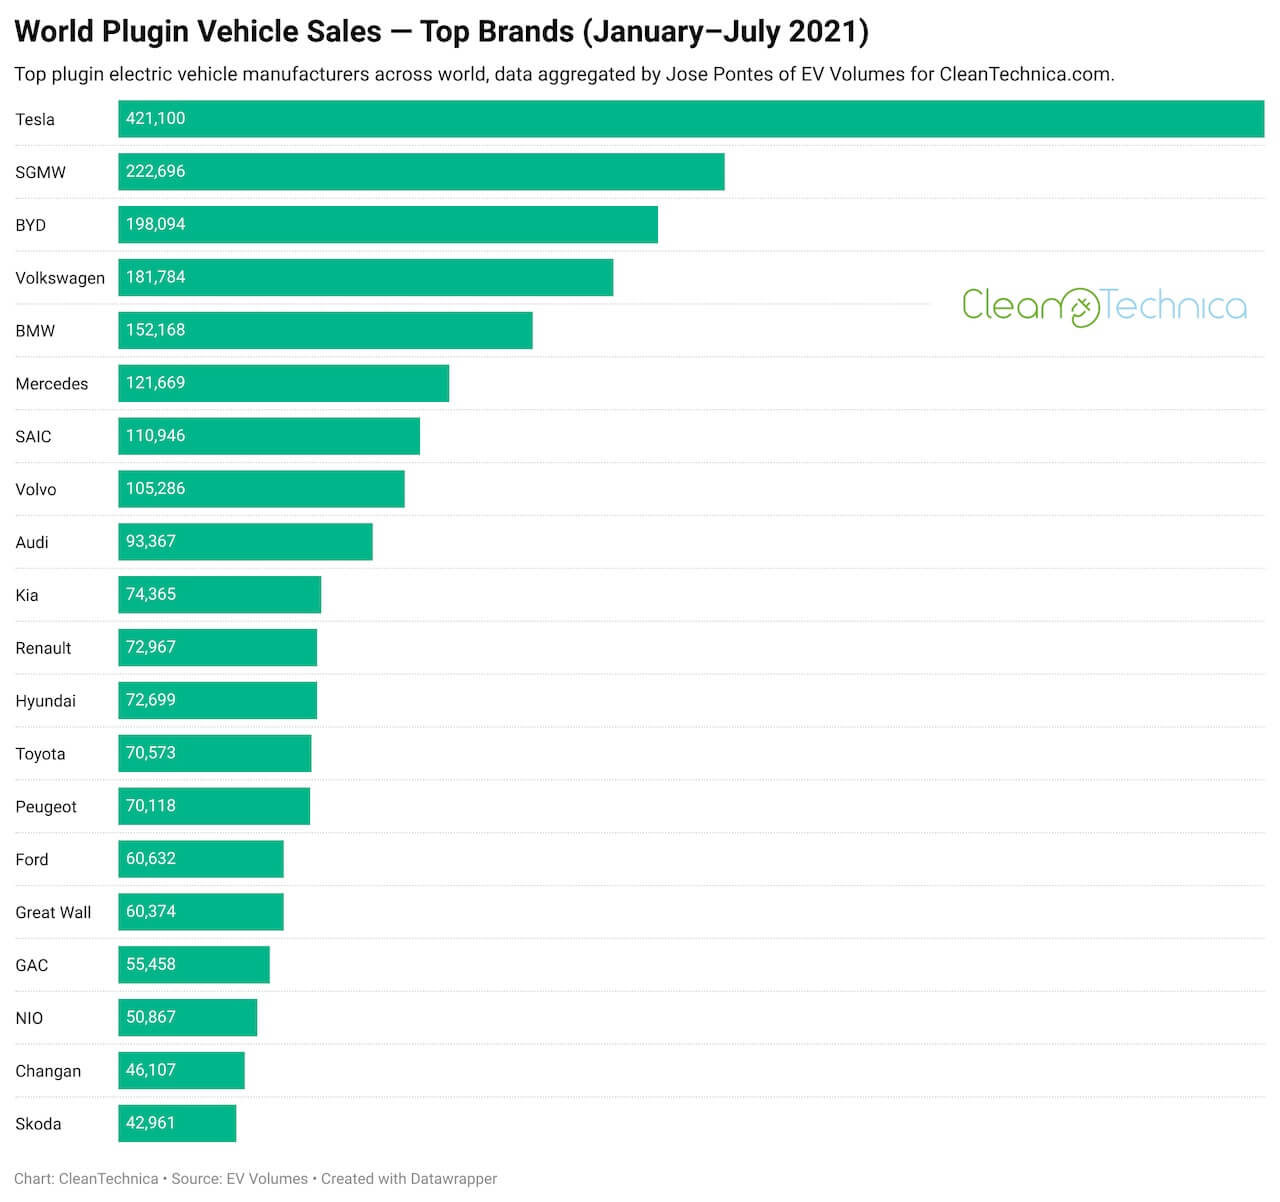 World-plugin-vehicle-sales-top-brands-January-July-2021-CleanTechnica-watermark